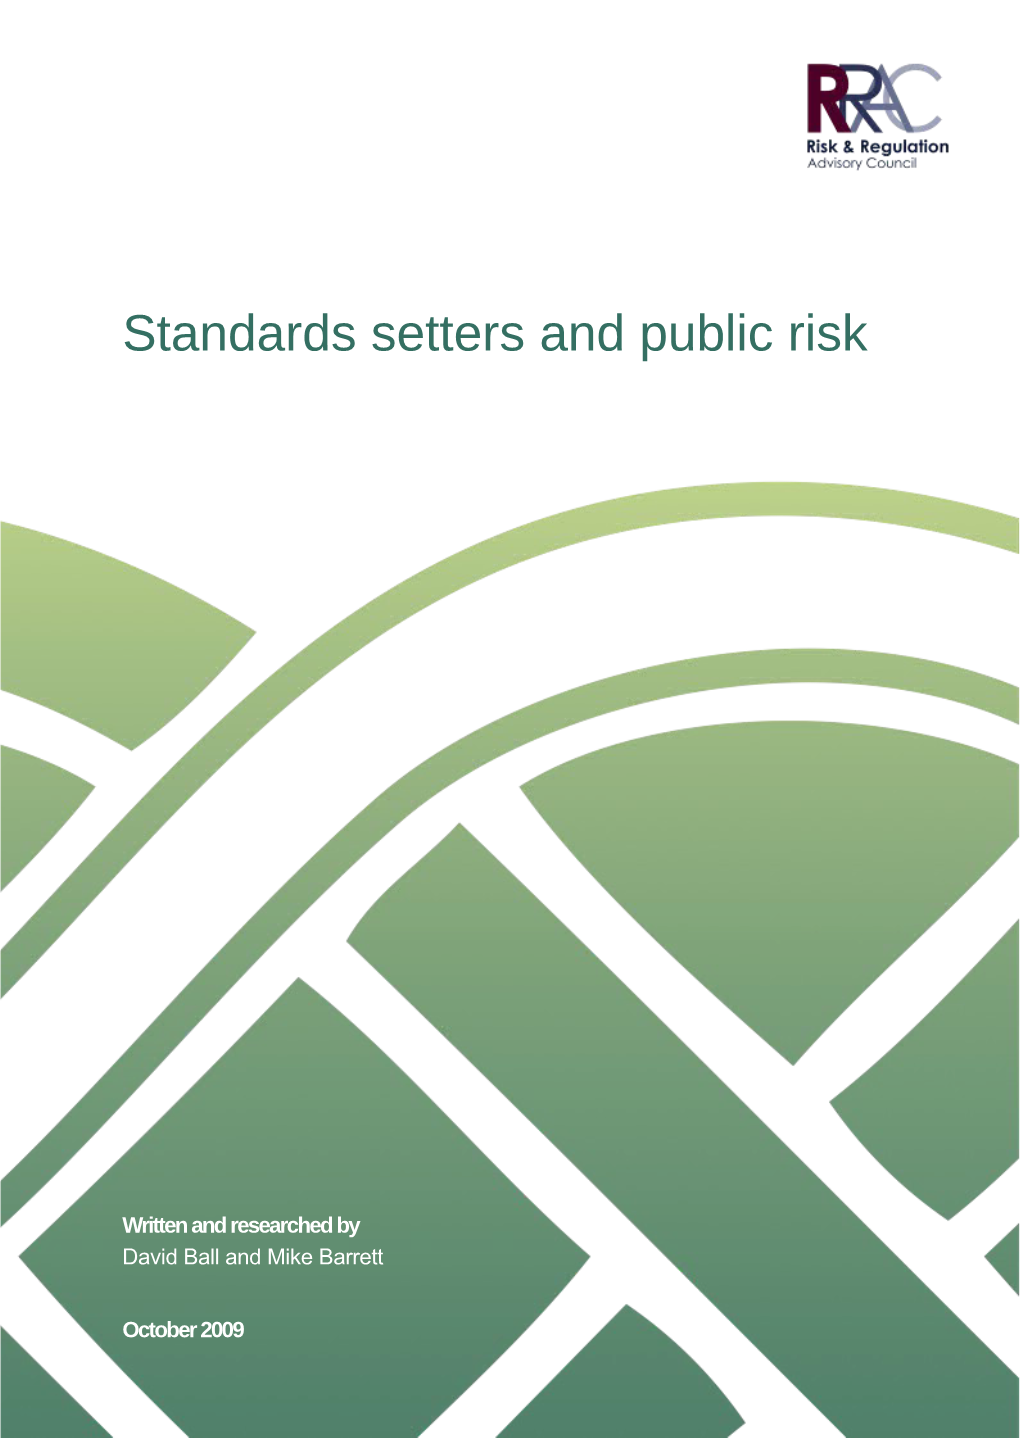 Standards Setters and Public Risk